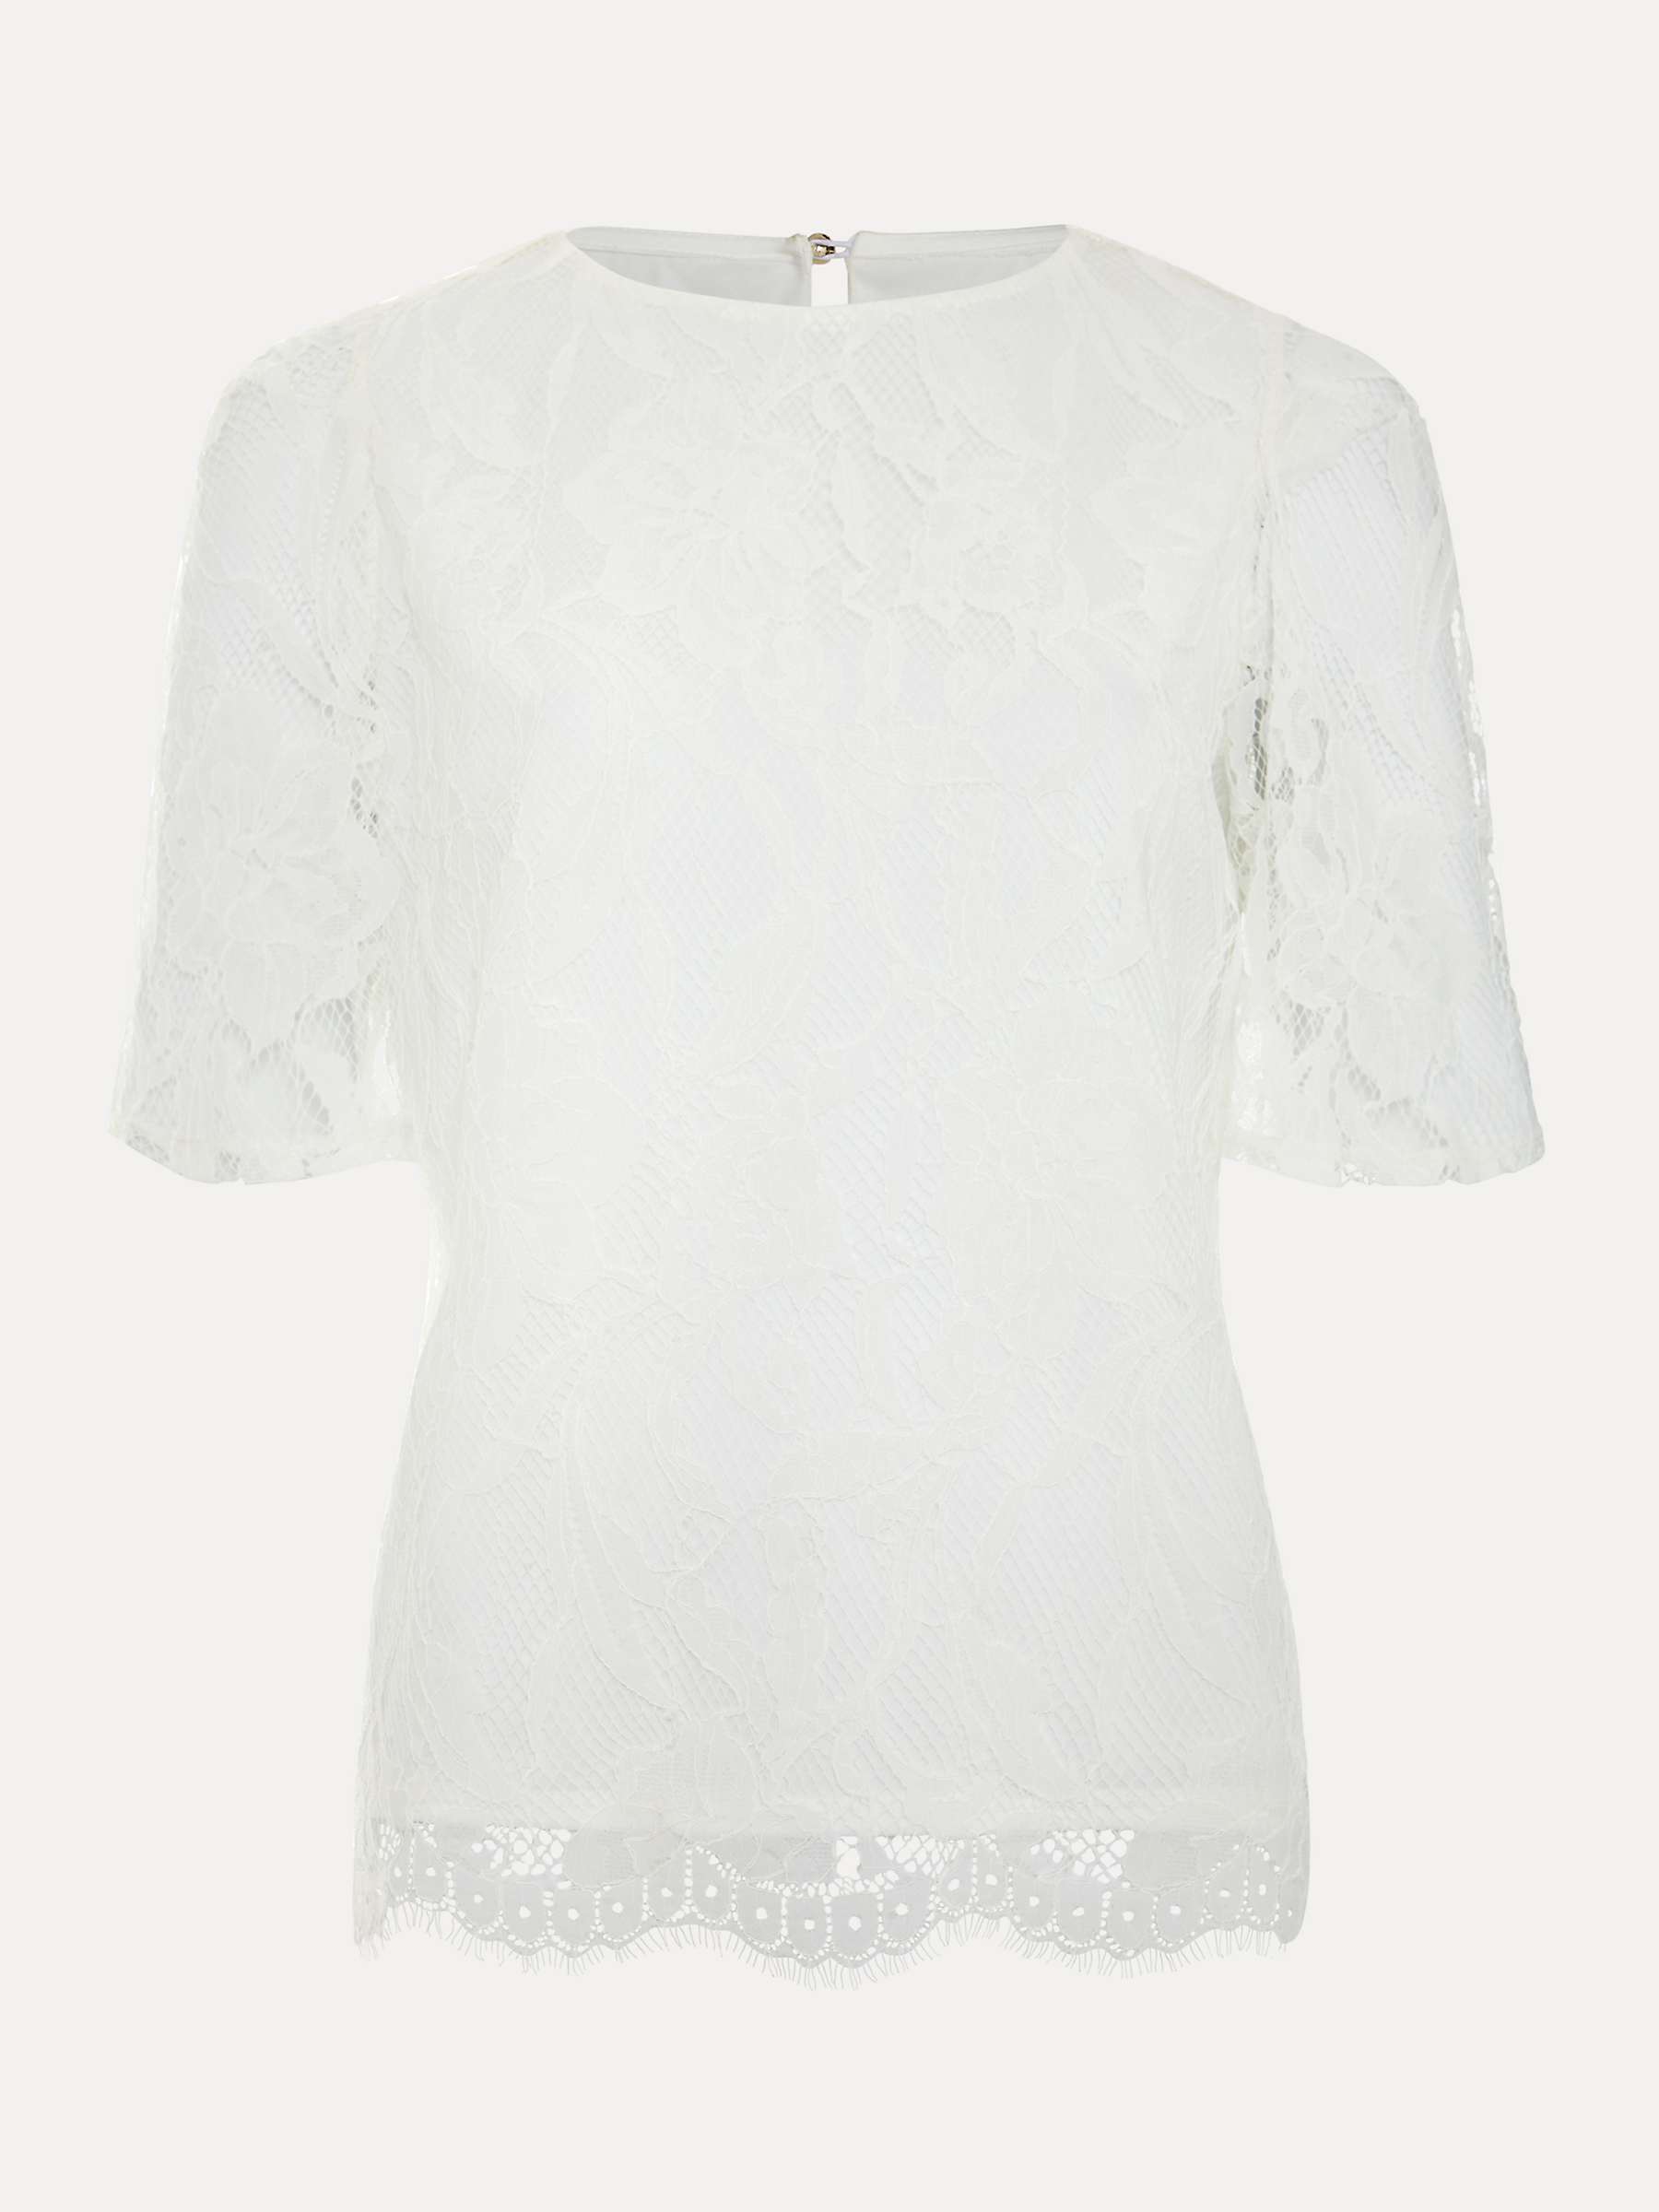 Buy Phase Eight Kaycee Lace Top, Ivory Online at johnlewis.com